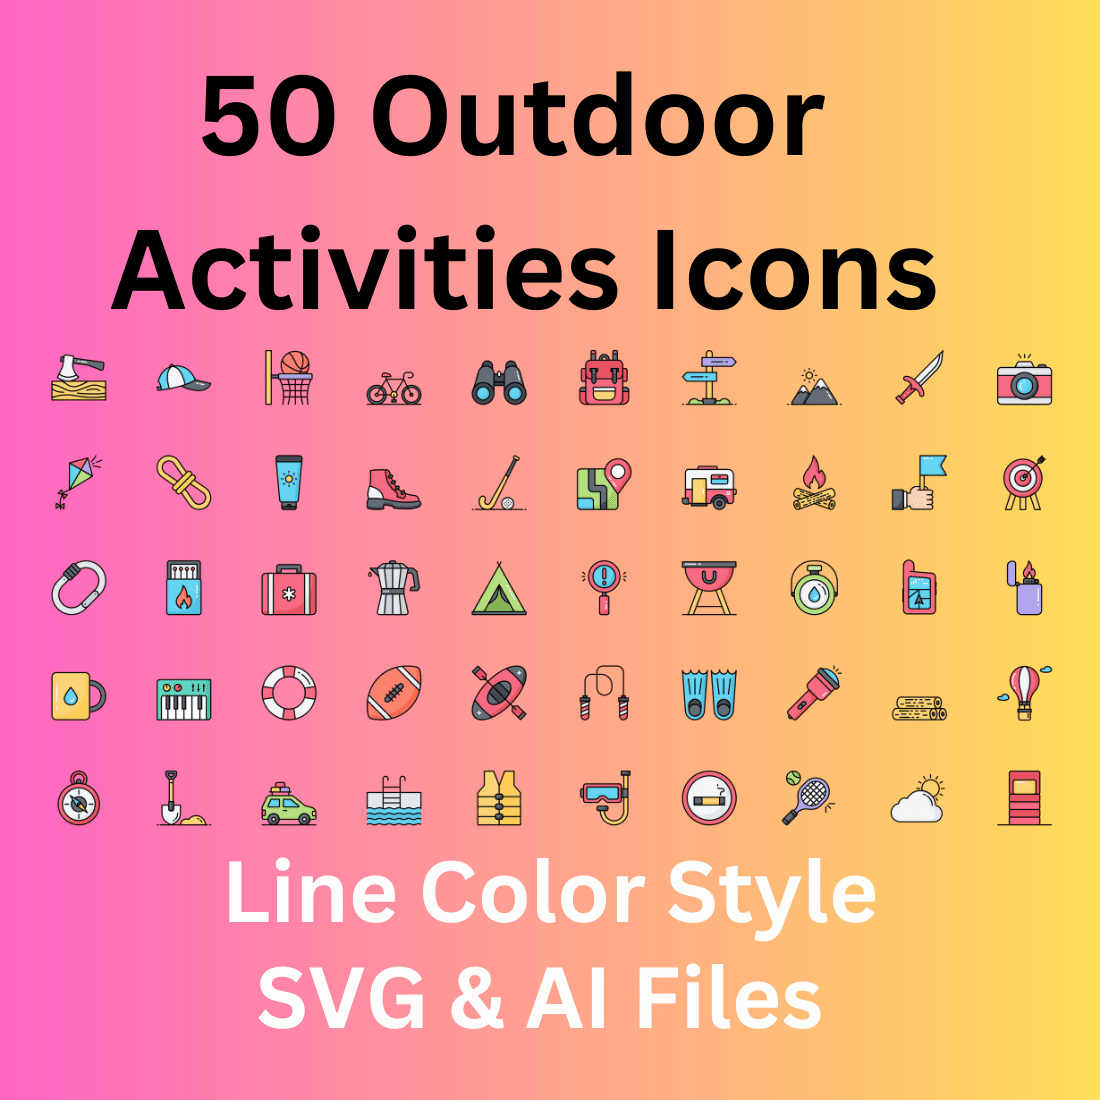 Outdoor Activities Icon Set 50 Line Color Icons - SVG And AI Files cover image.